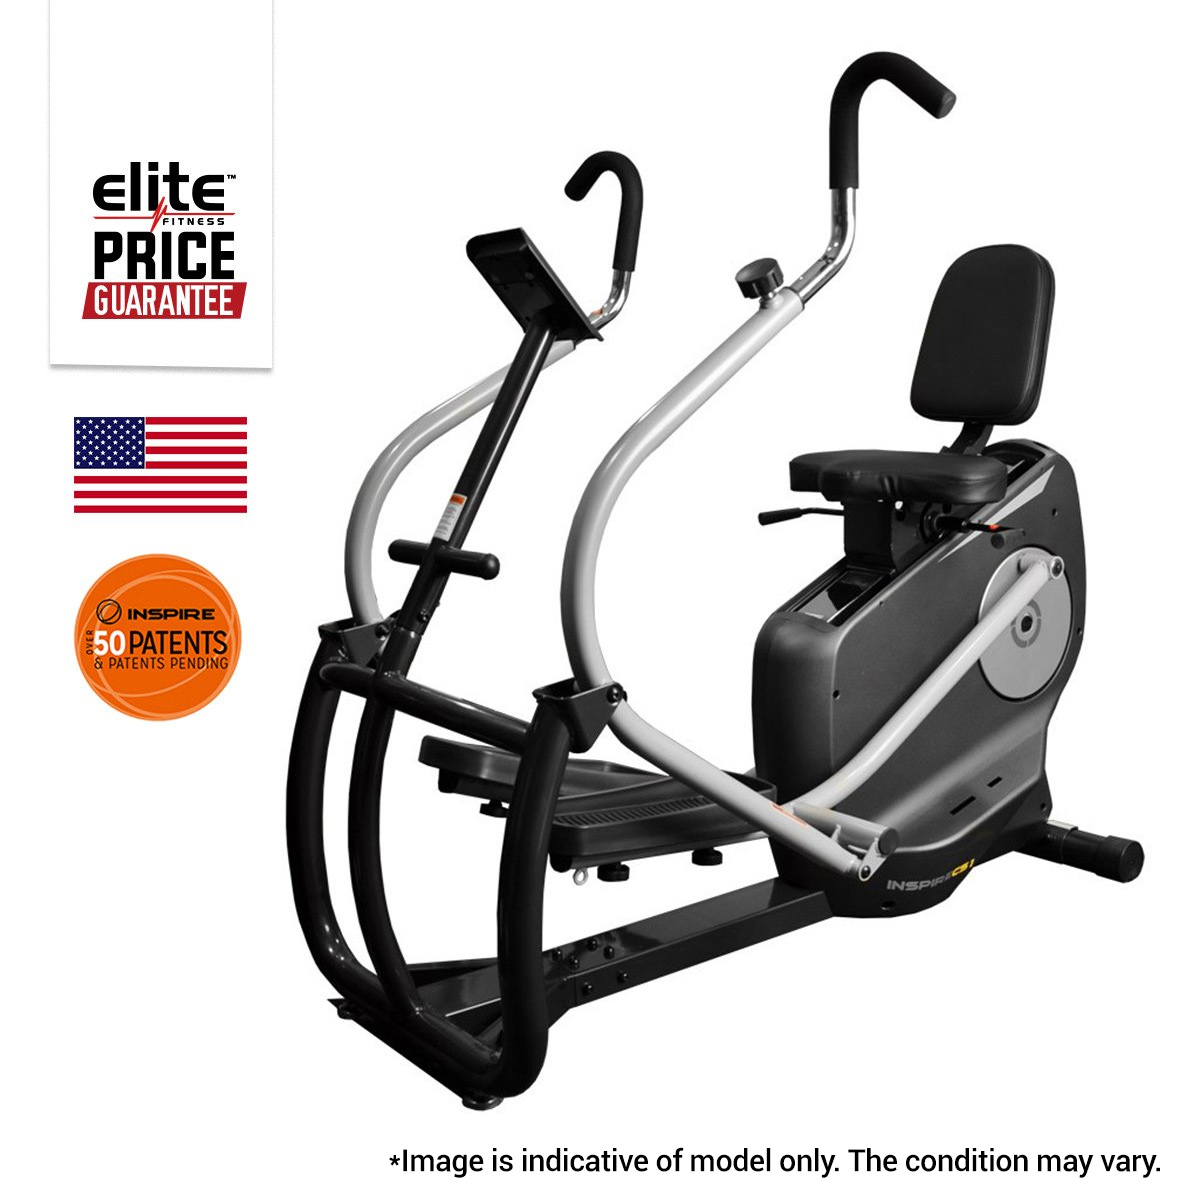 CARDIO STRIDER CS1 - AVAILABLE IN GLENFIELD 